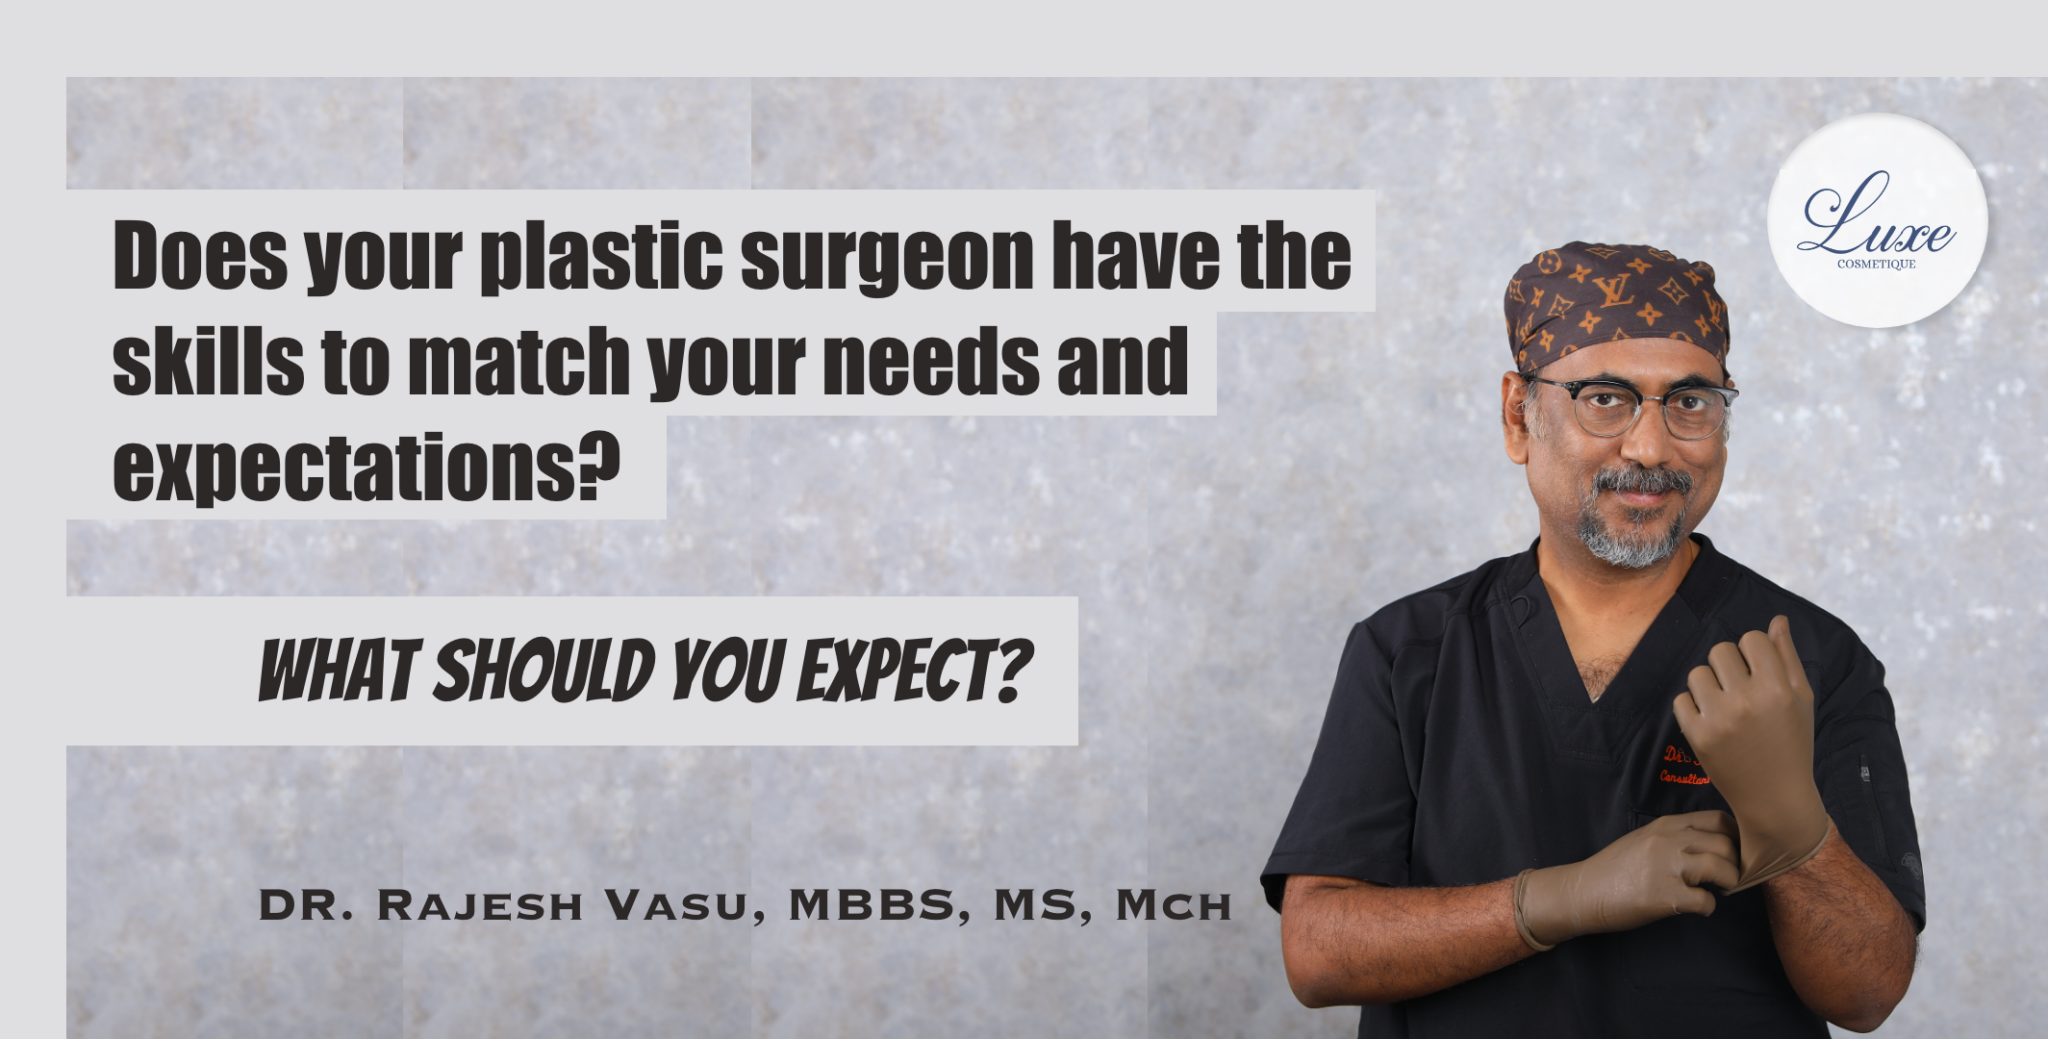 Does your plastic surgeon have the skills to match your needs and expectations?